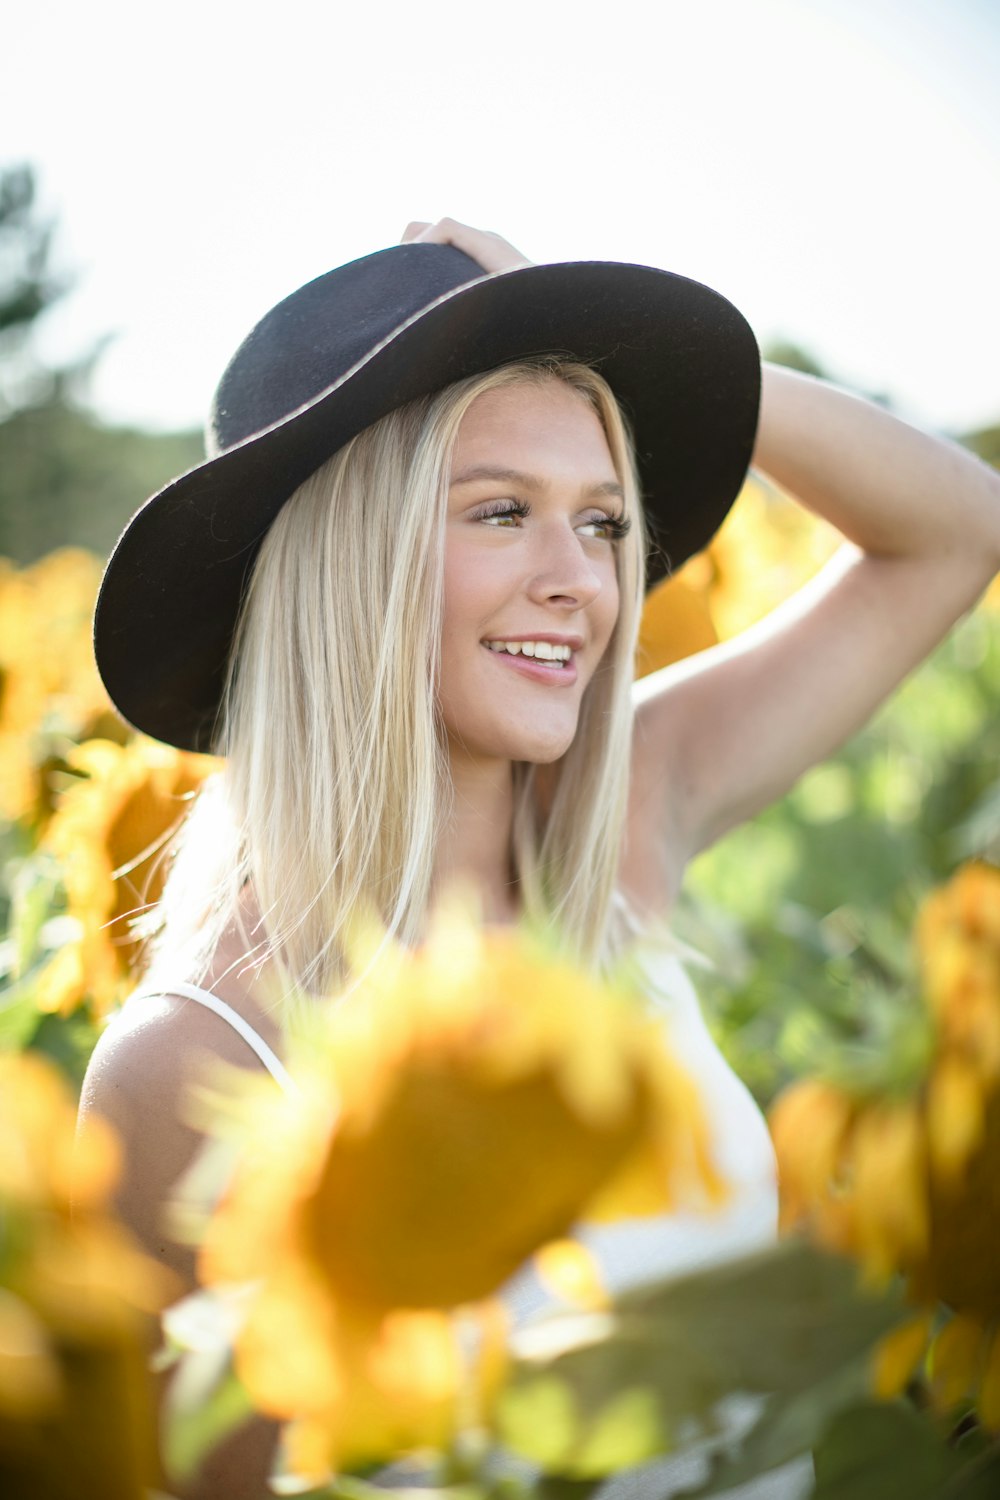 a woman wearing a hat standing in a field of sunflowers